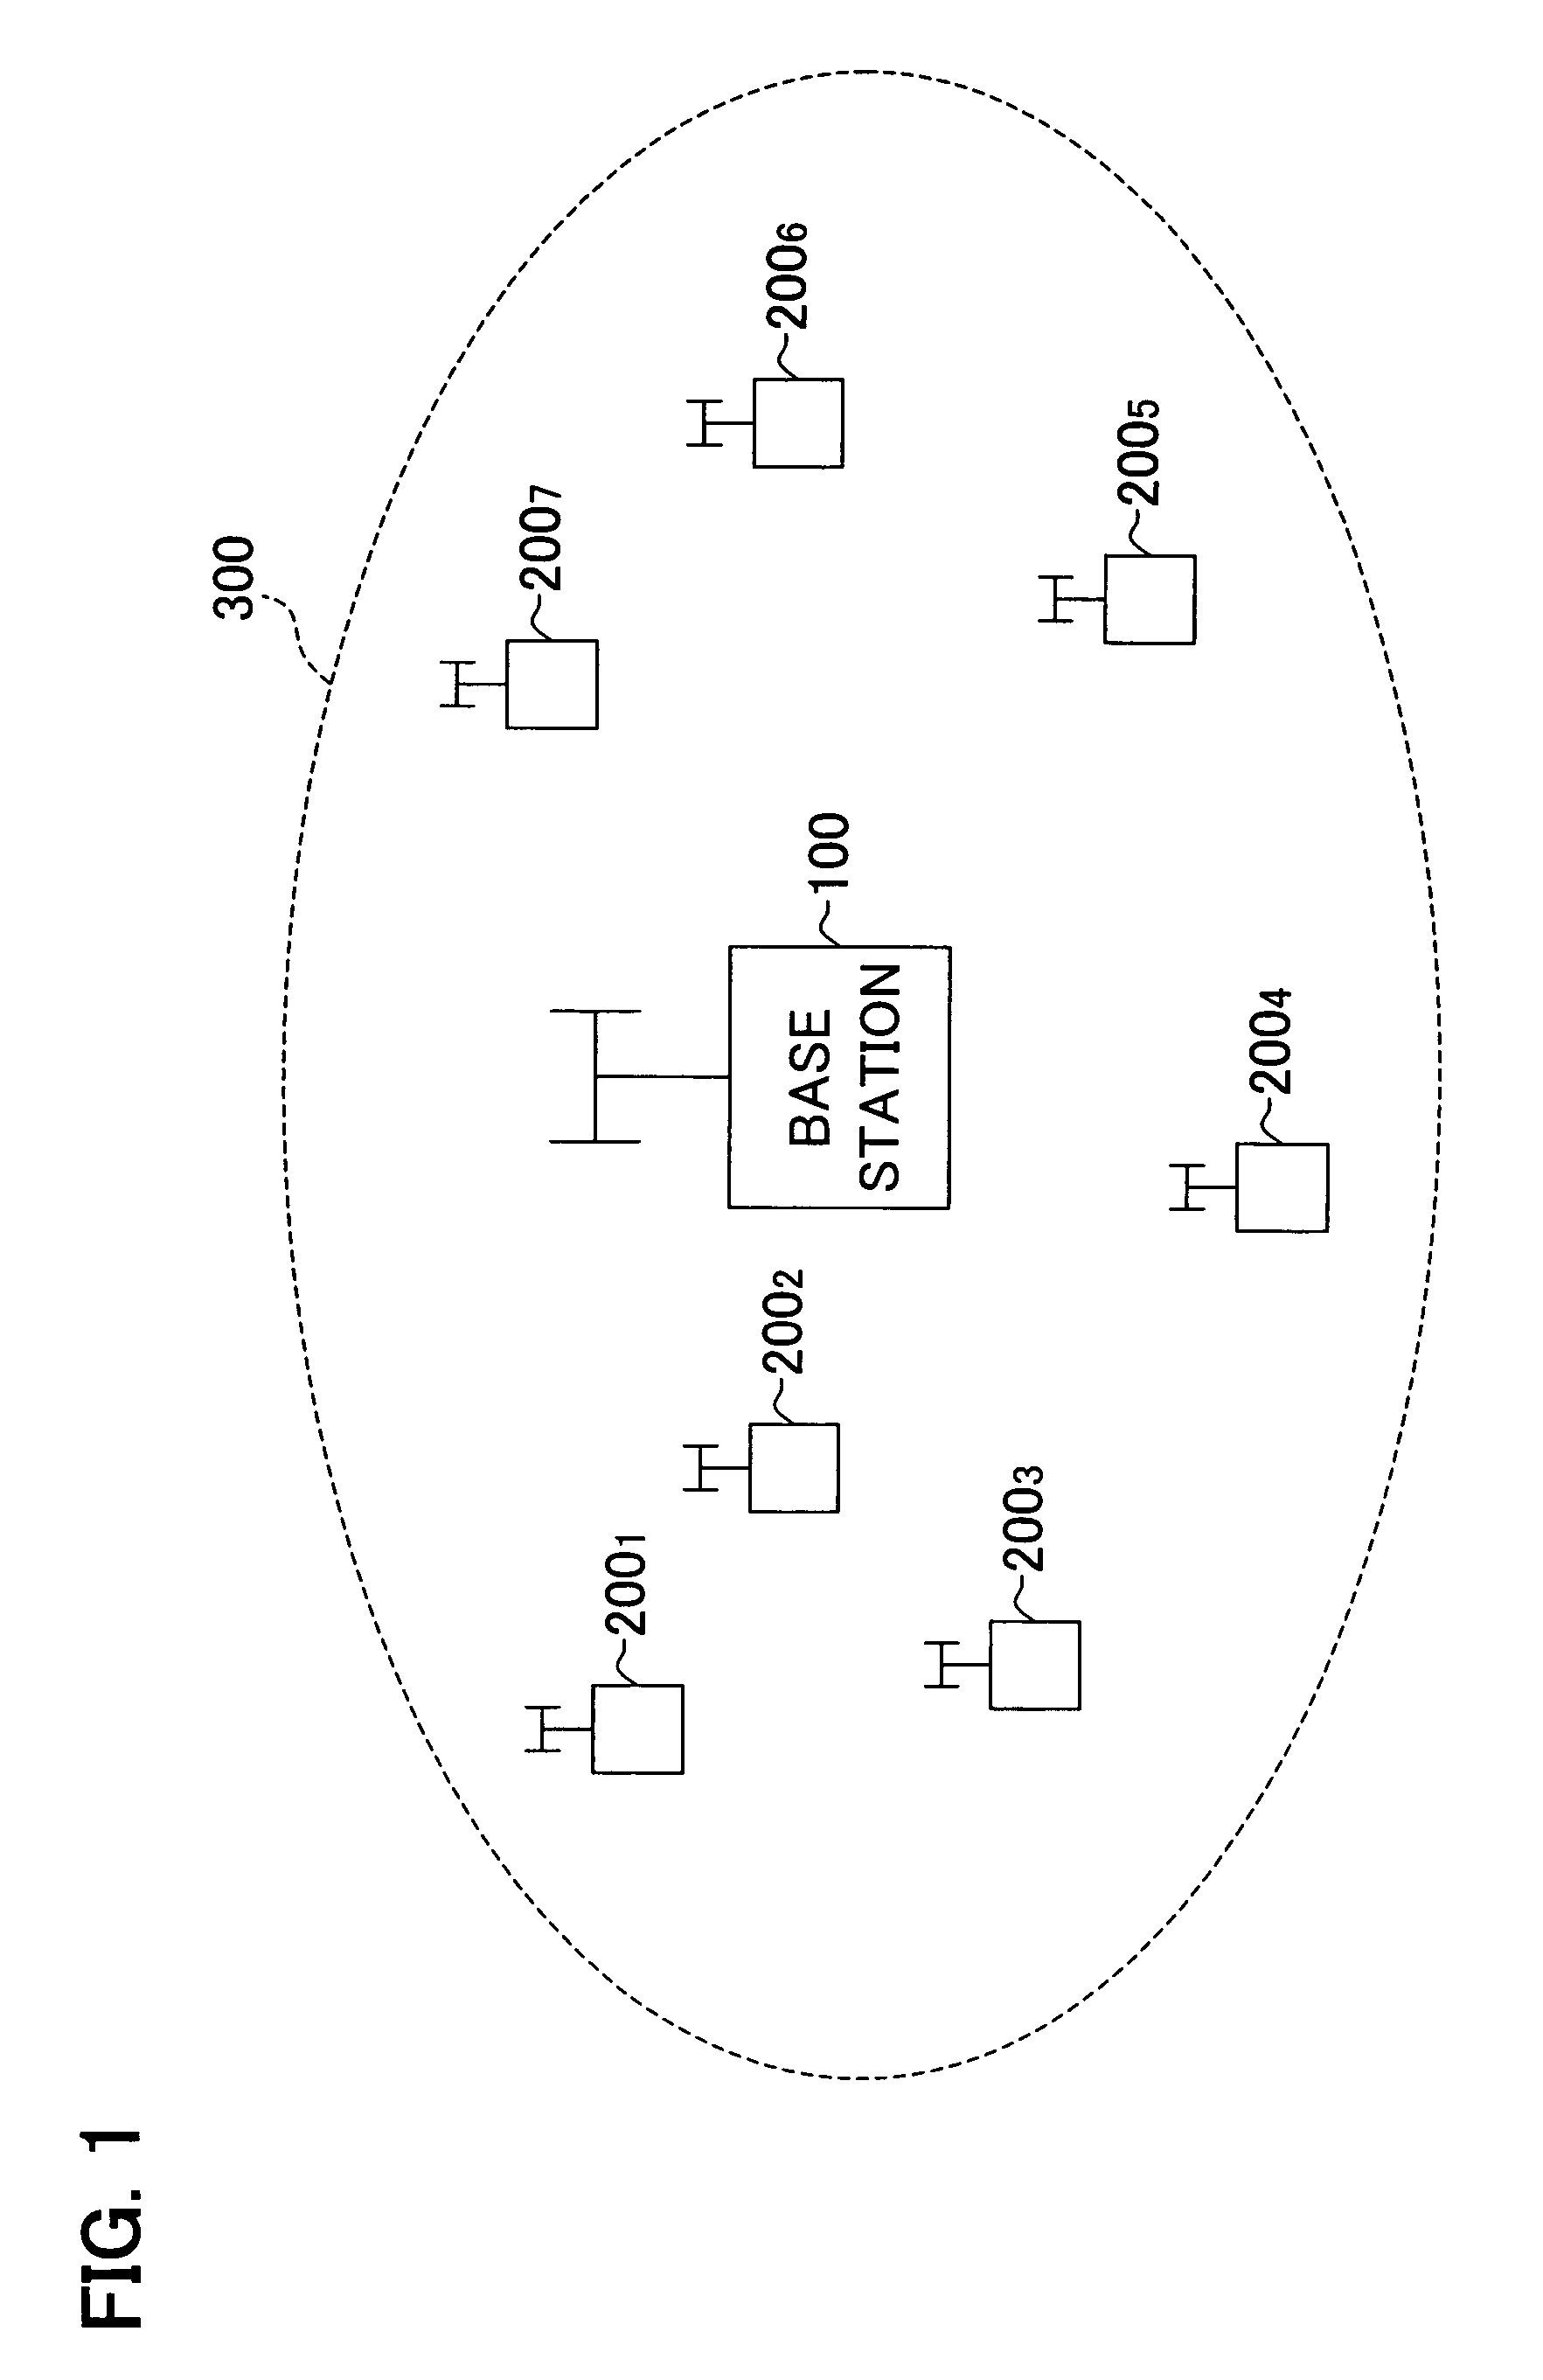 Transmitting device for assigning data for receiving device selected from plurality of receiving devices to shared channel